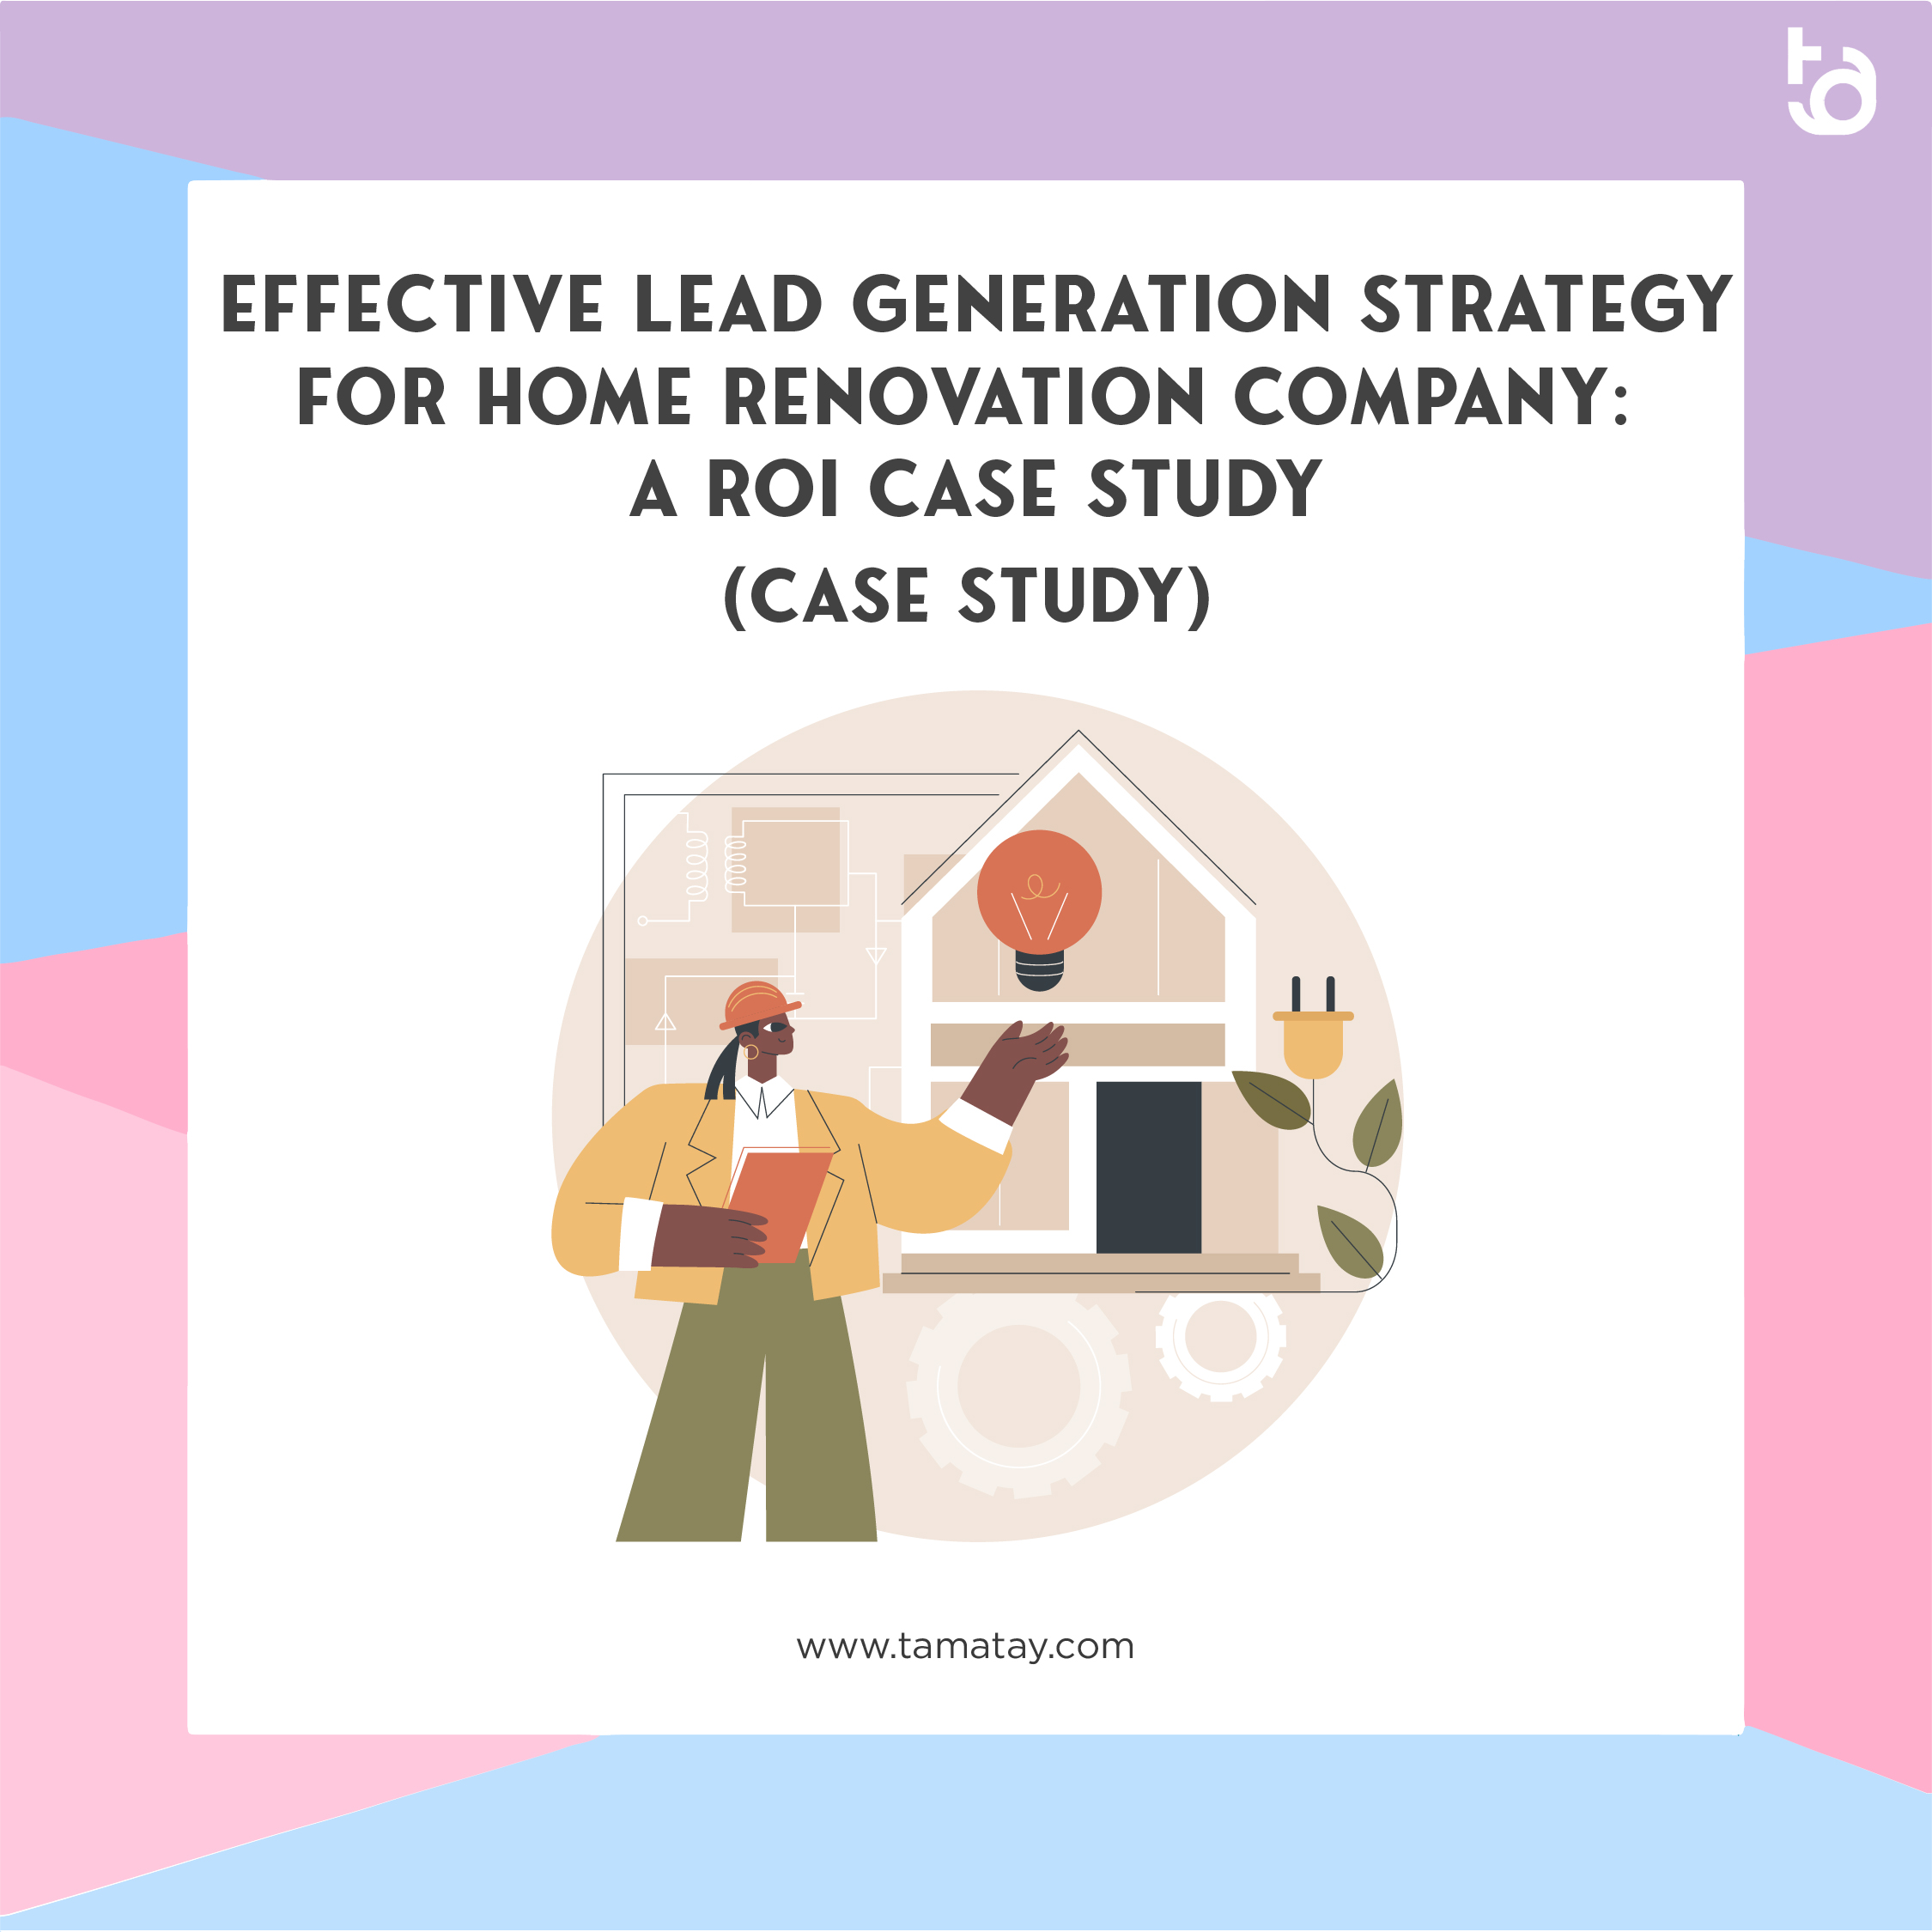 Effective Lead Generation Strategy for Home Renovation Company: A ROI Case Study